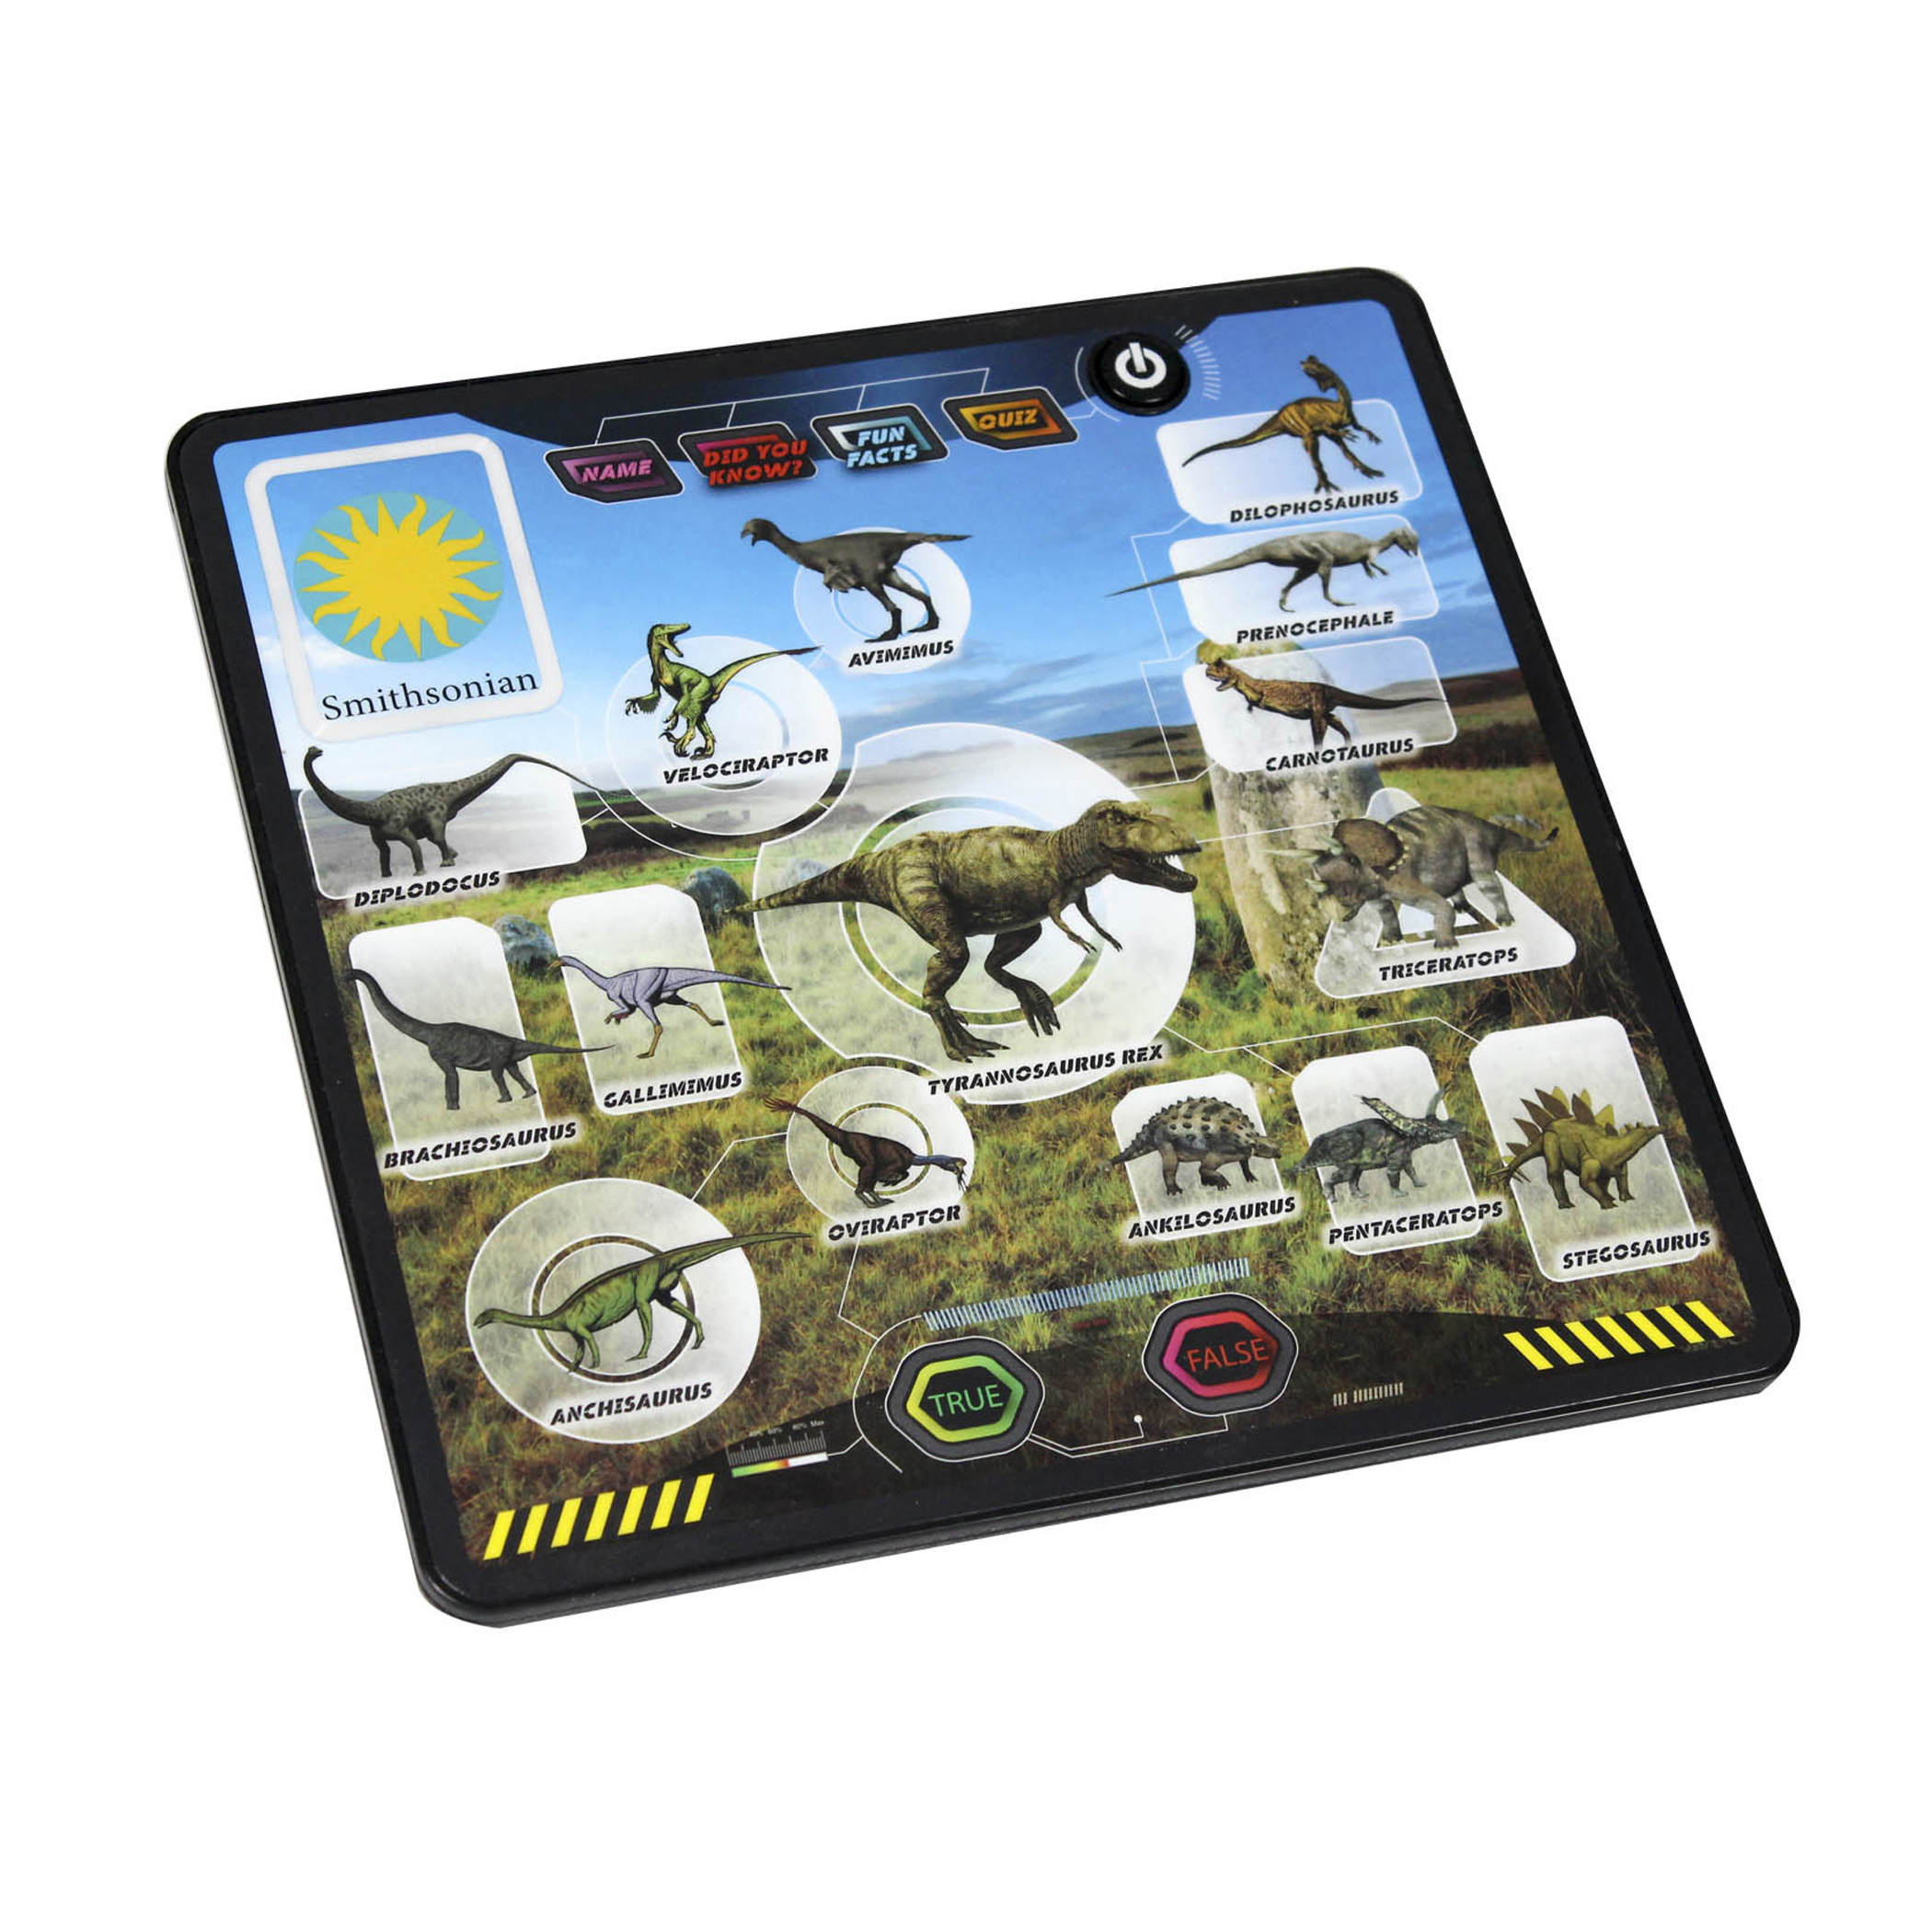 Kidz Delight Smithsonian Kids' Dino Toy Tablet- Learn about Dino's for Children Ages 3 Years and up - image 3 of 3